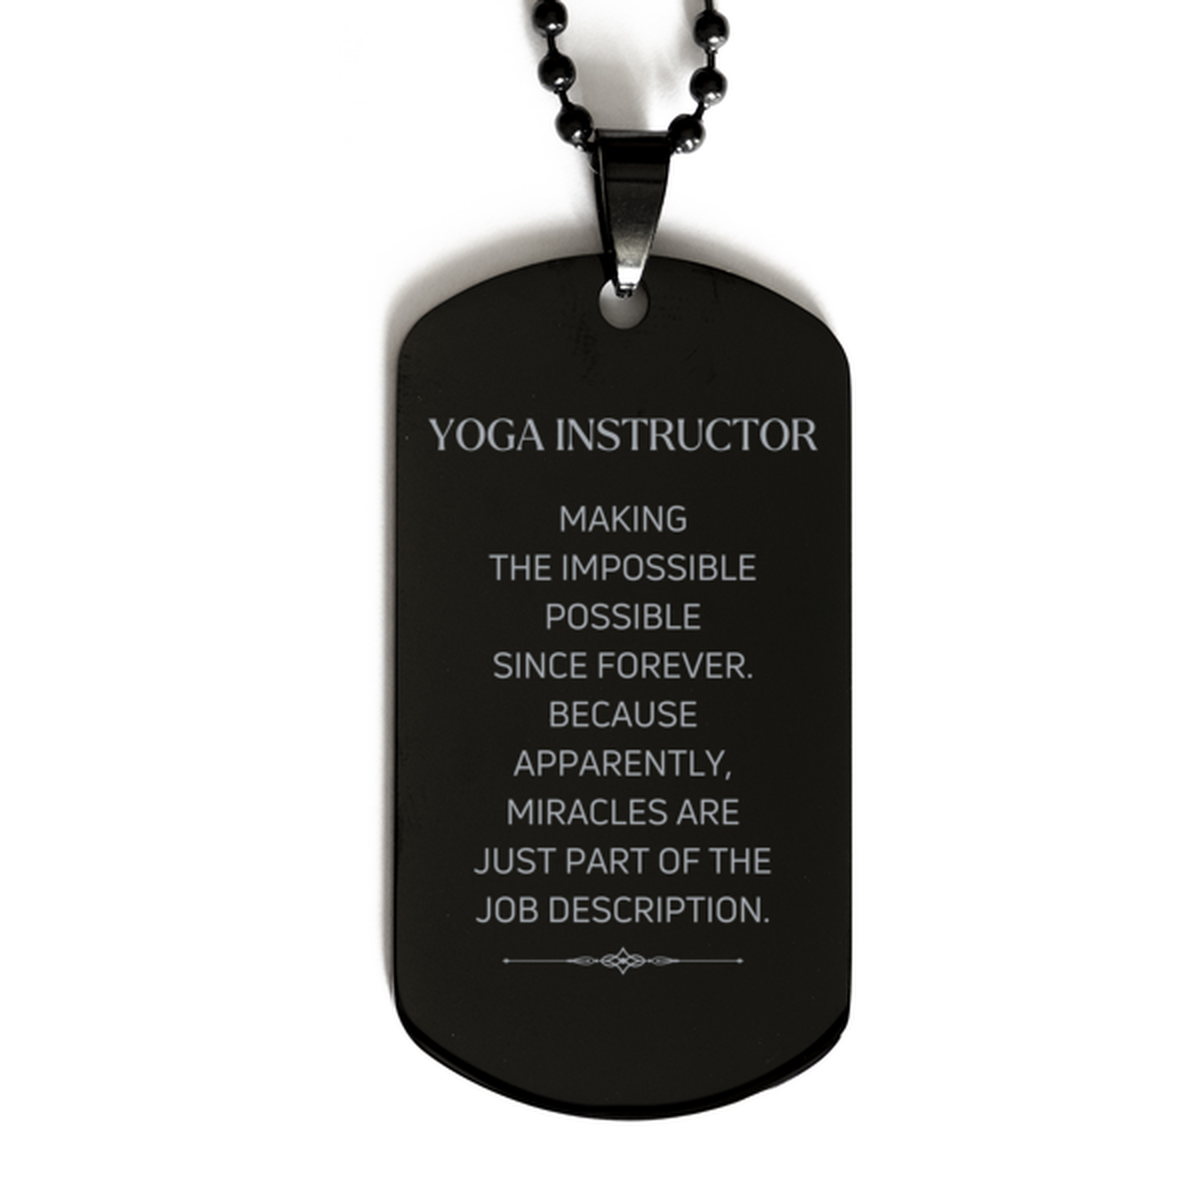 Funny Yoga Instructor Gifts, Miracles are just part of the job description, Inspirational Birthday Black Dog Tag For Yoga Instructor, Men, Women, Coworkers, Friends, Boss